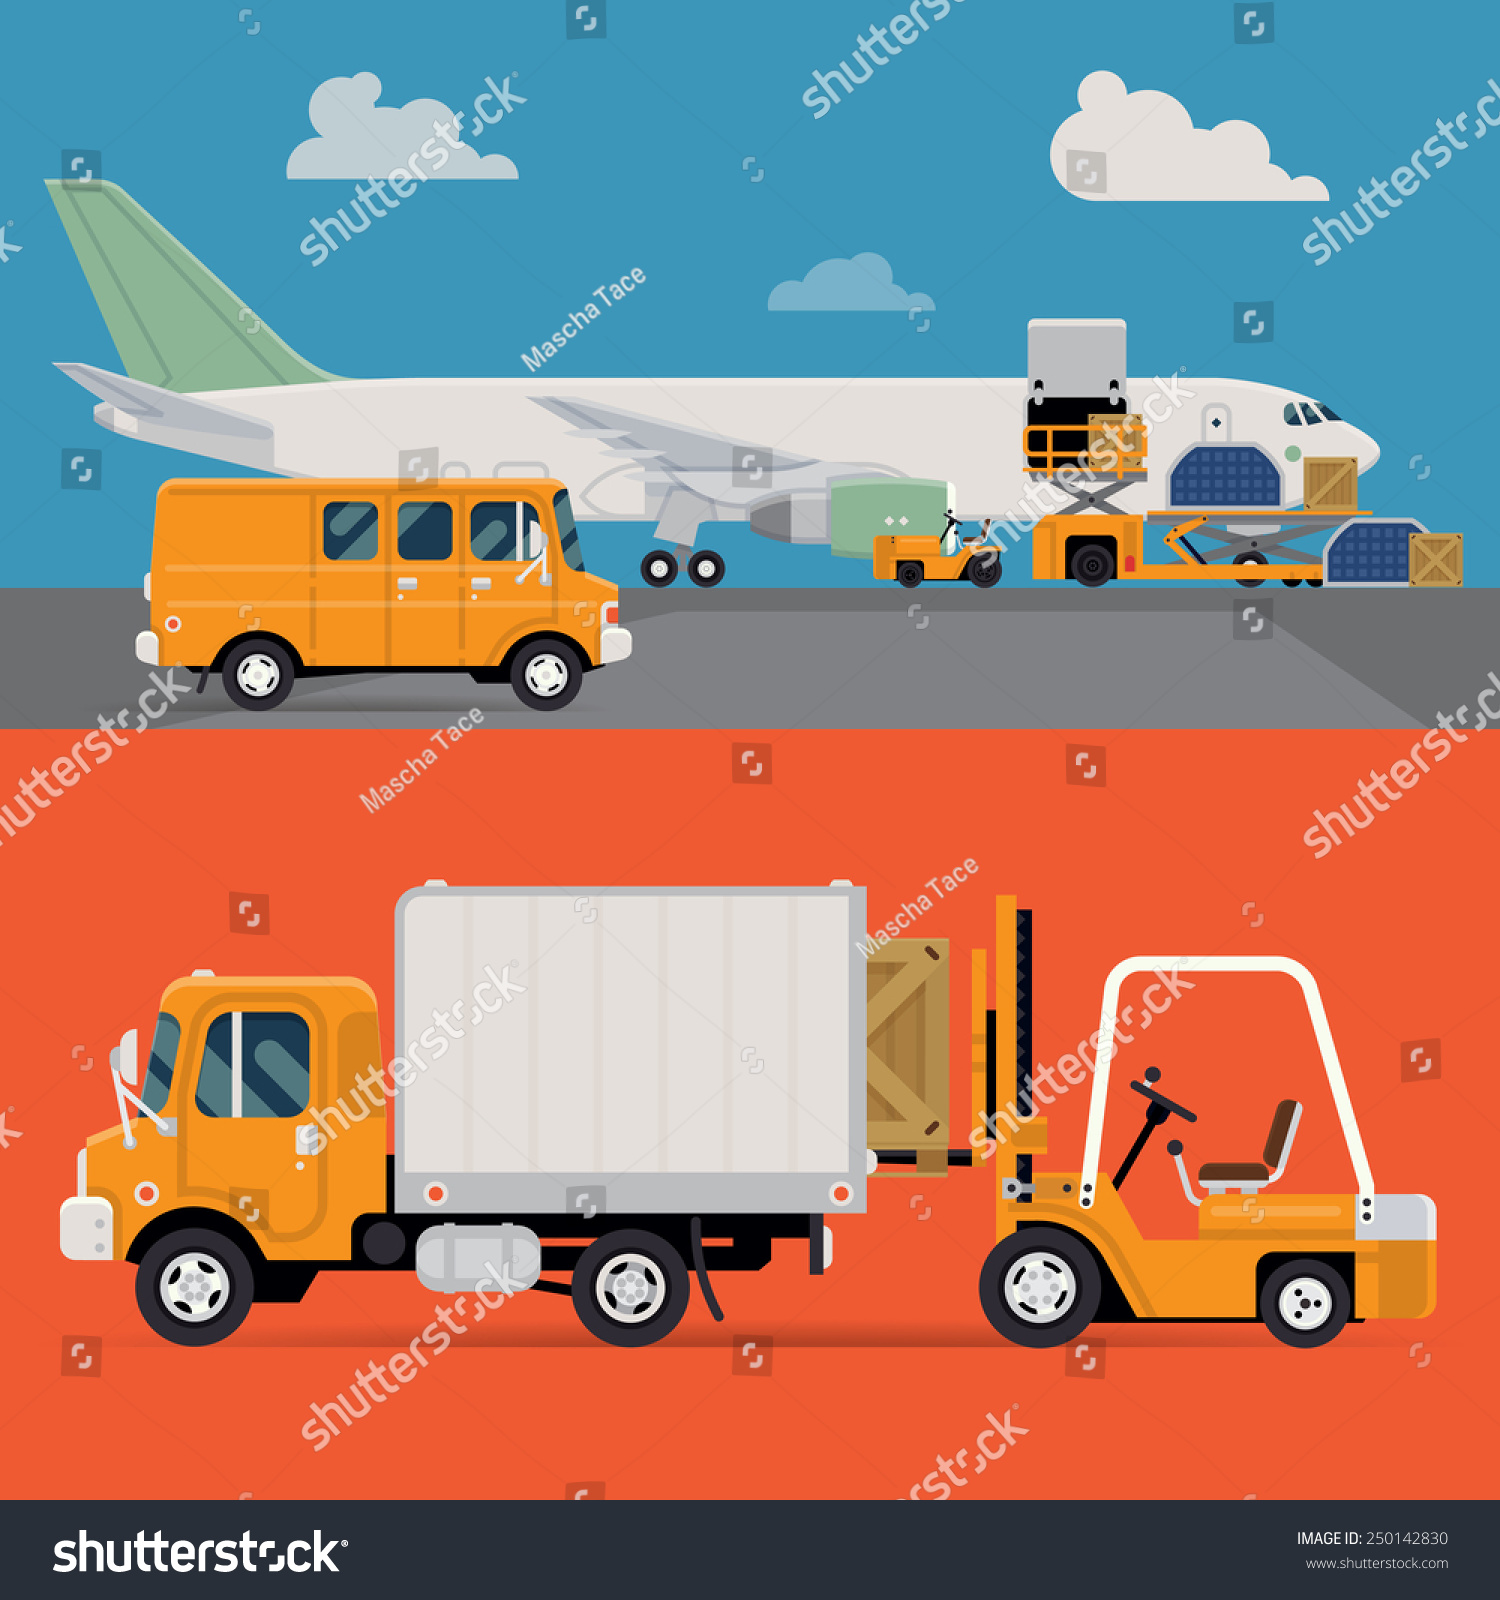 Vector Set Of Modern Creative Detailed Visuals On Delivery And Shipping Logistics Service In